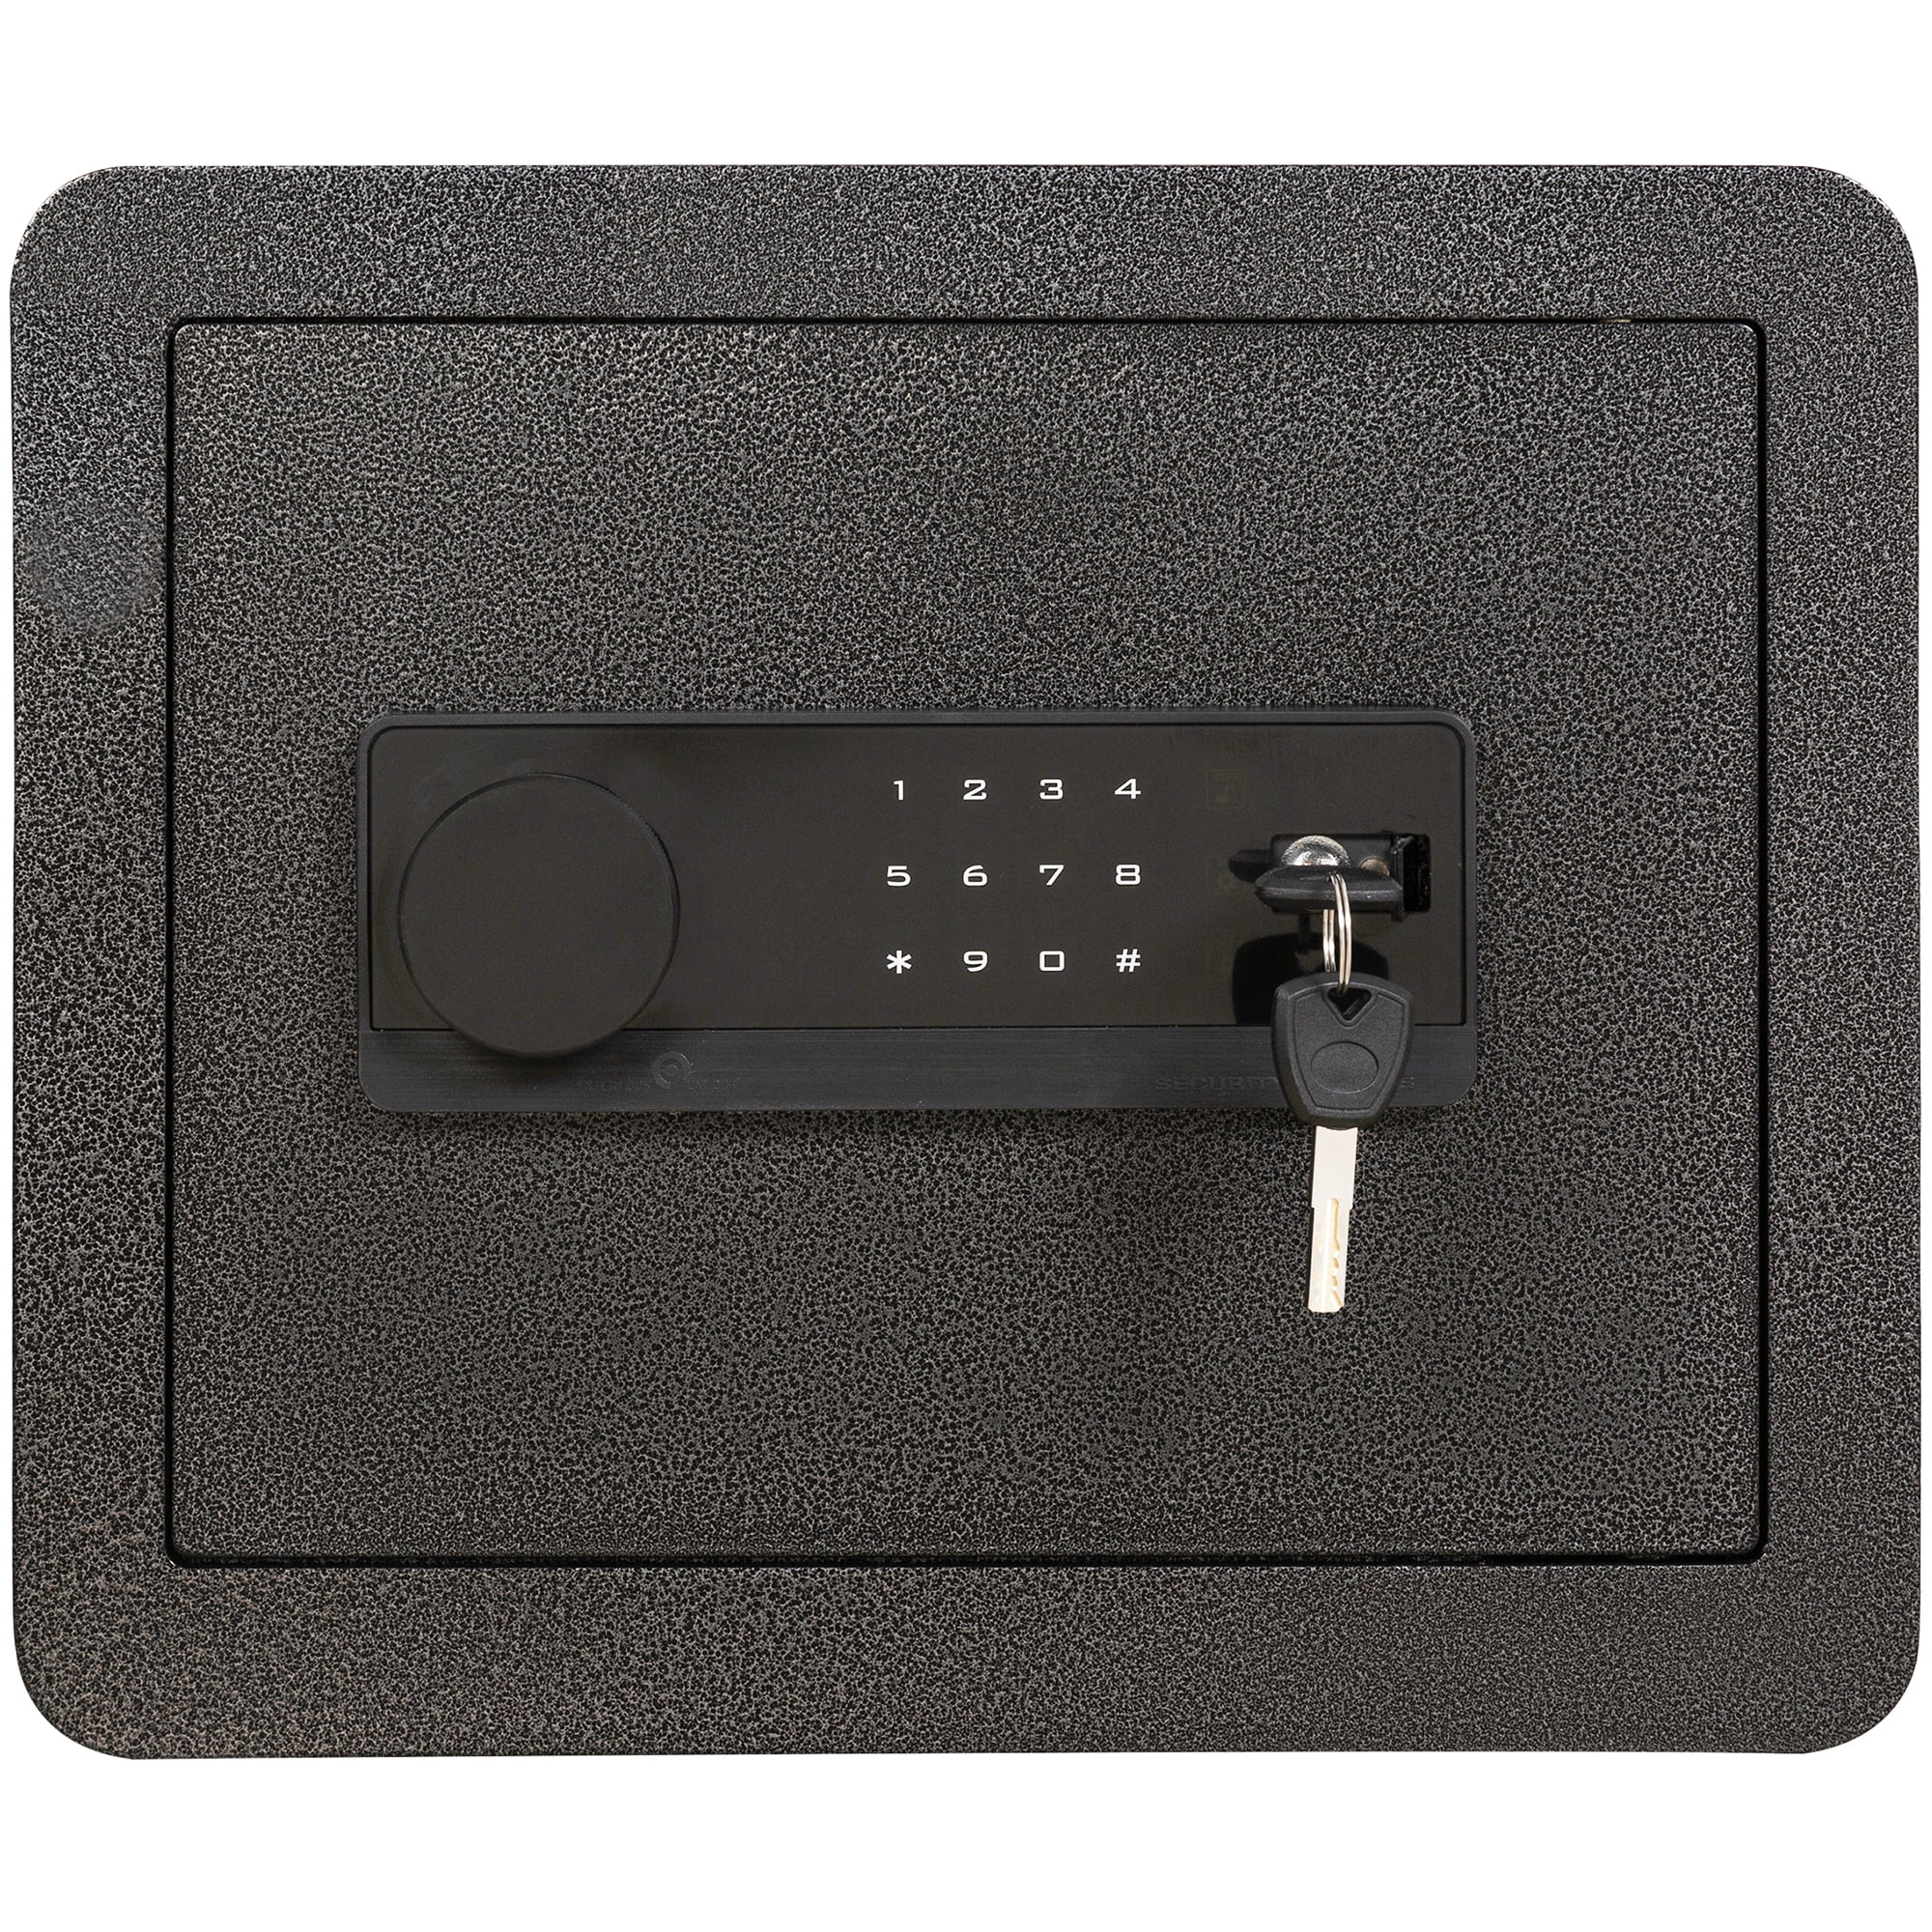 Details about   In-home Security Safe Fireproof Box Waterproof Box Key Lock Secure Document Box 